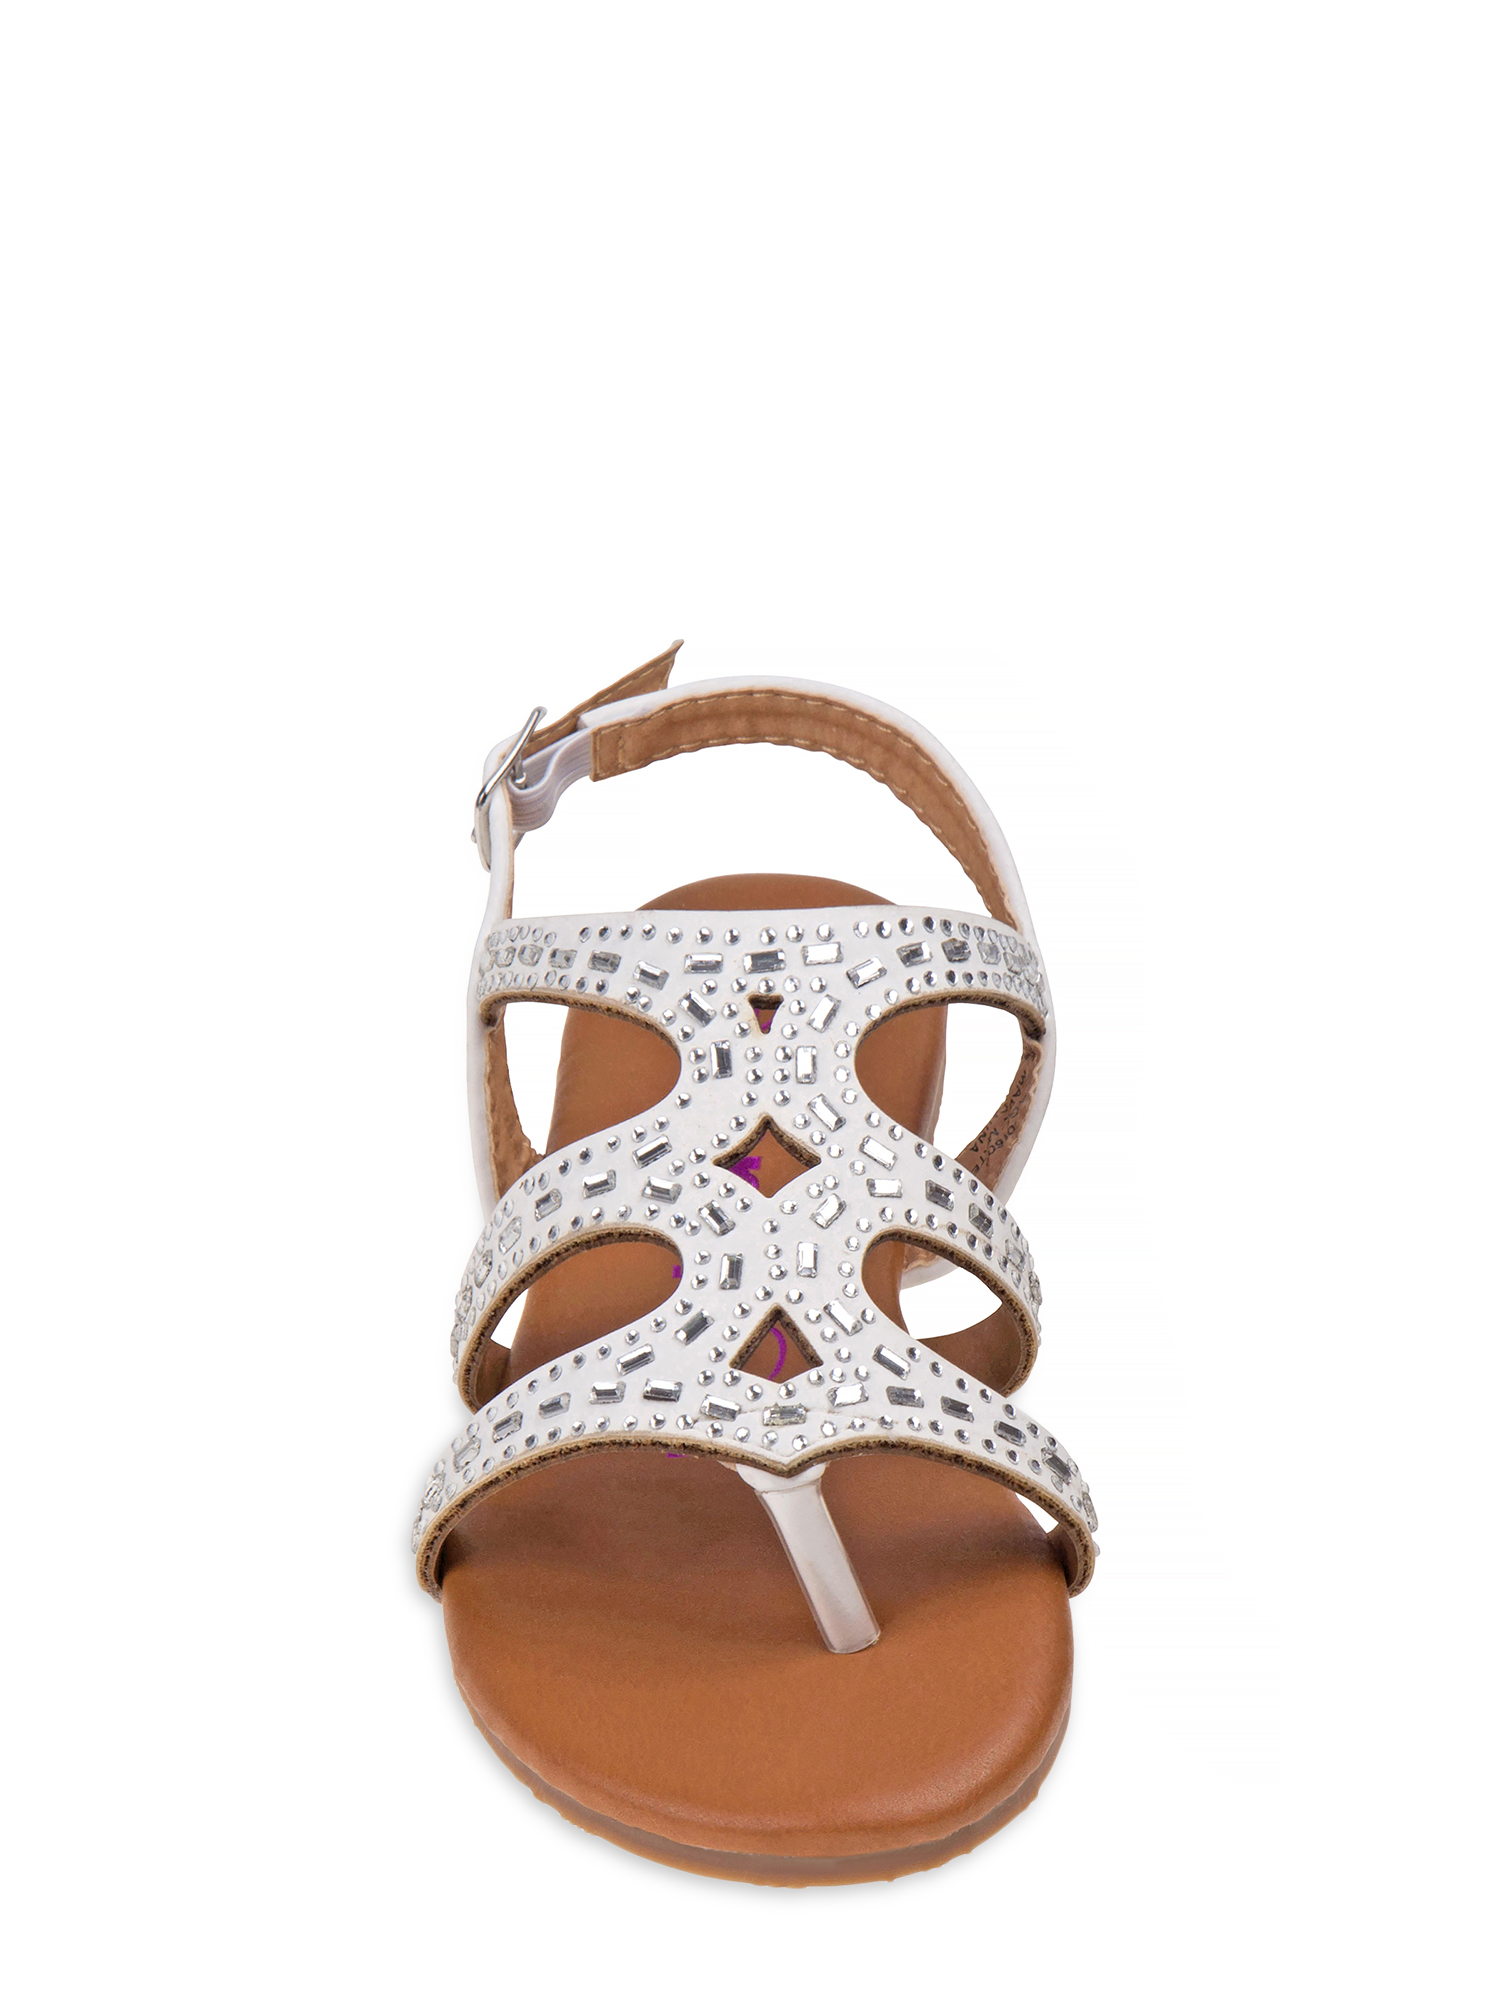 Kensie Girl open-toe Glitter Stud Encrusted Strappy Sandals - image 5 of 5